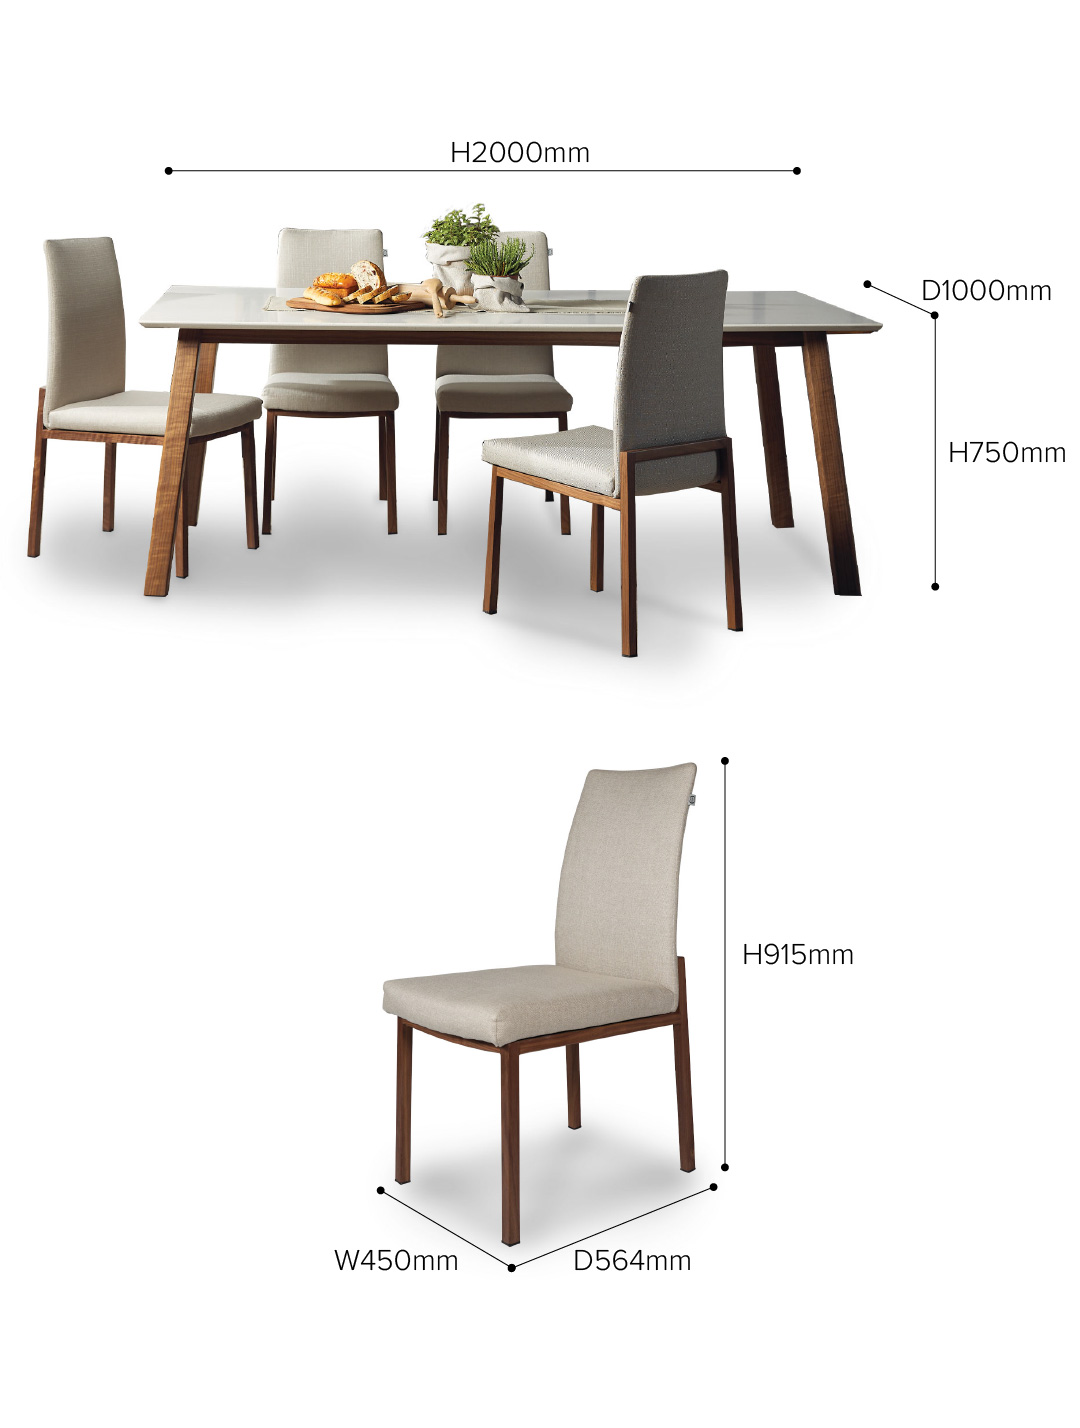 mobile-2m-bolda-dining-table-flex-dining-chair